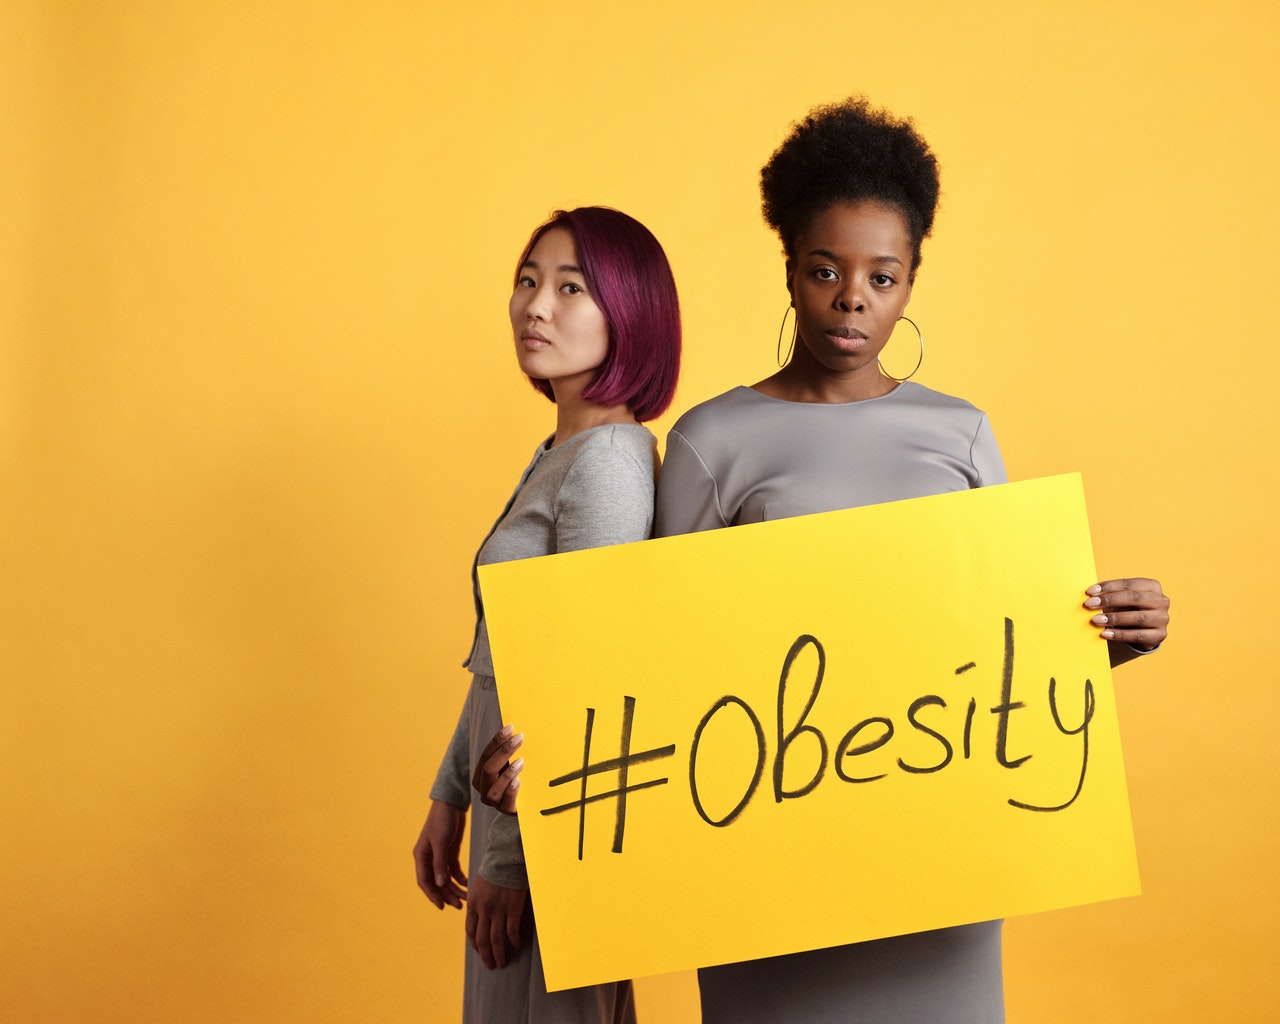 “Metabolically healthy obesity” still raises the risk of disease.